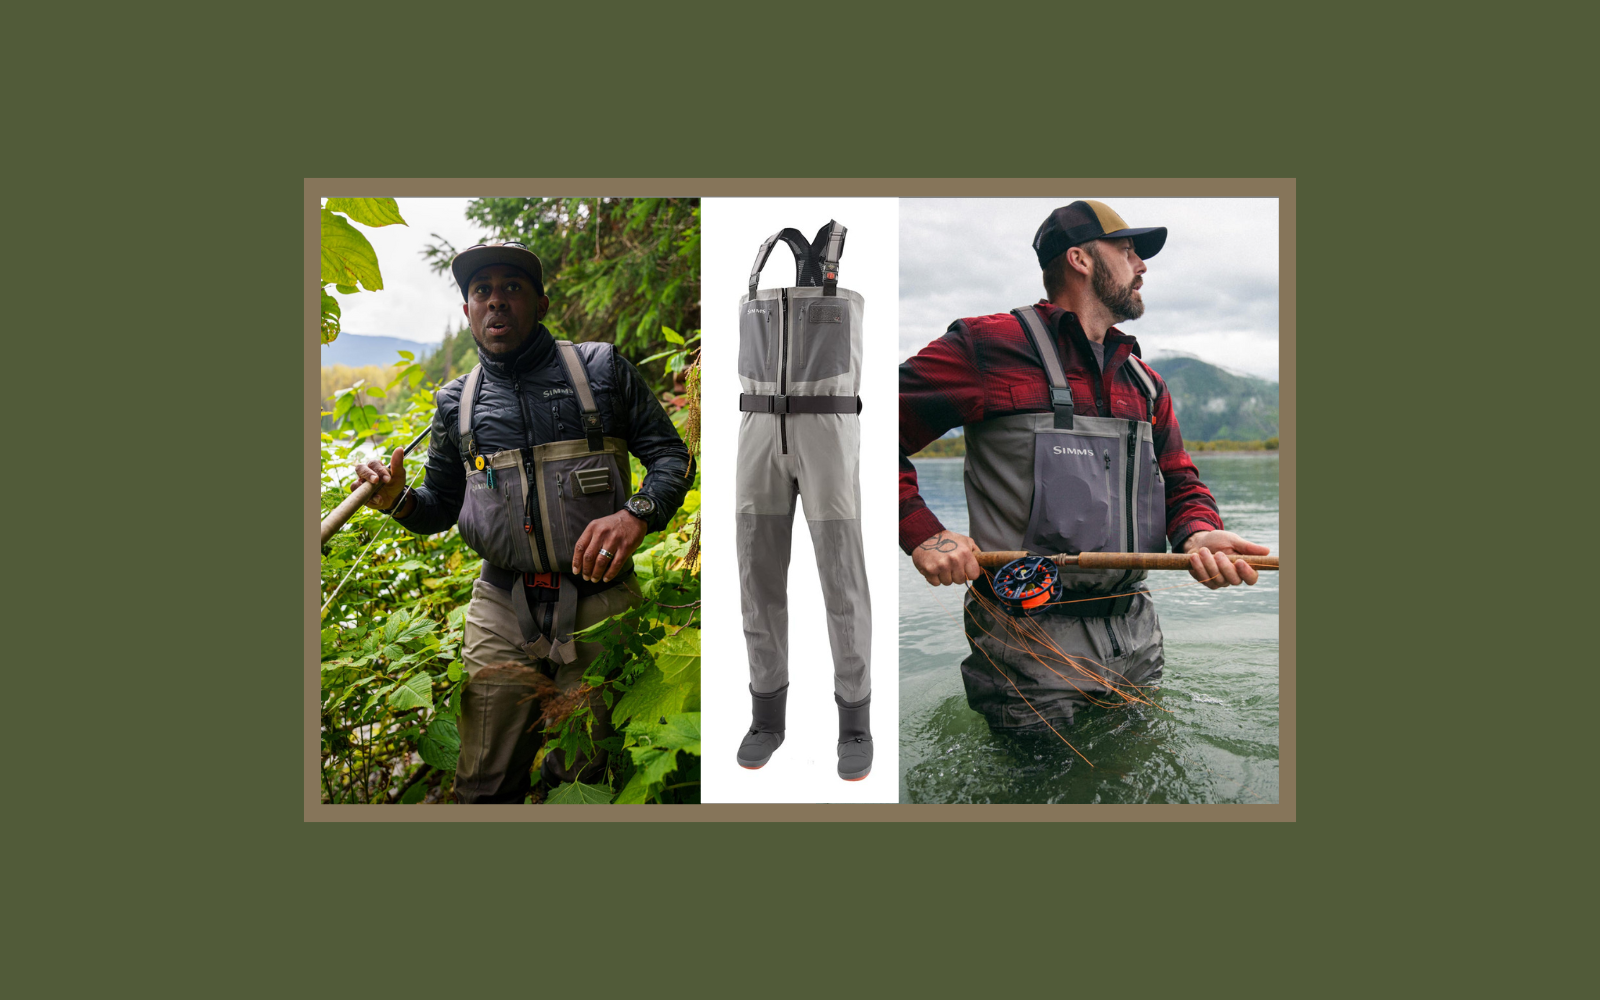 Simms Fishing Fishing Vests for sale